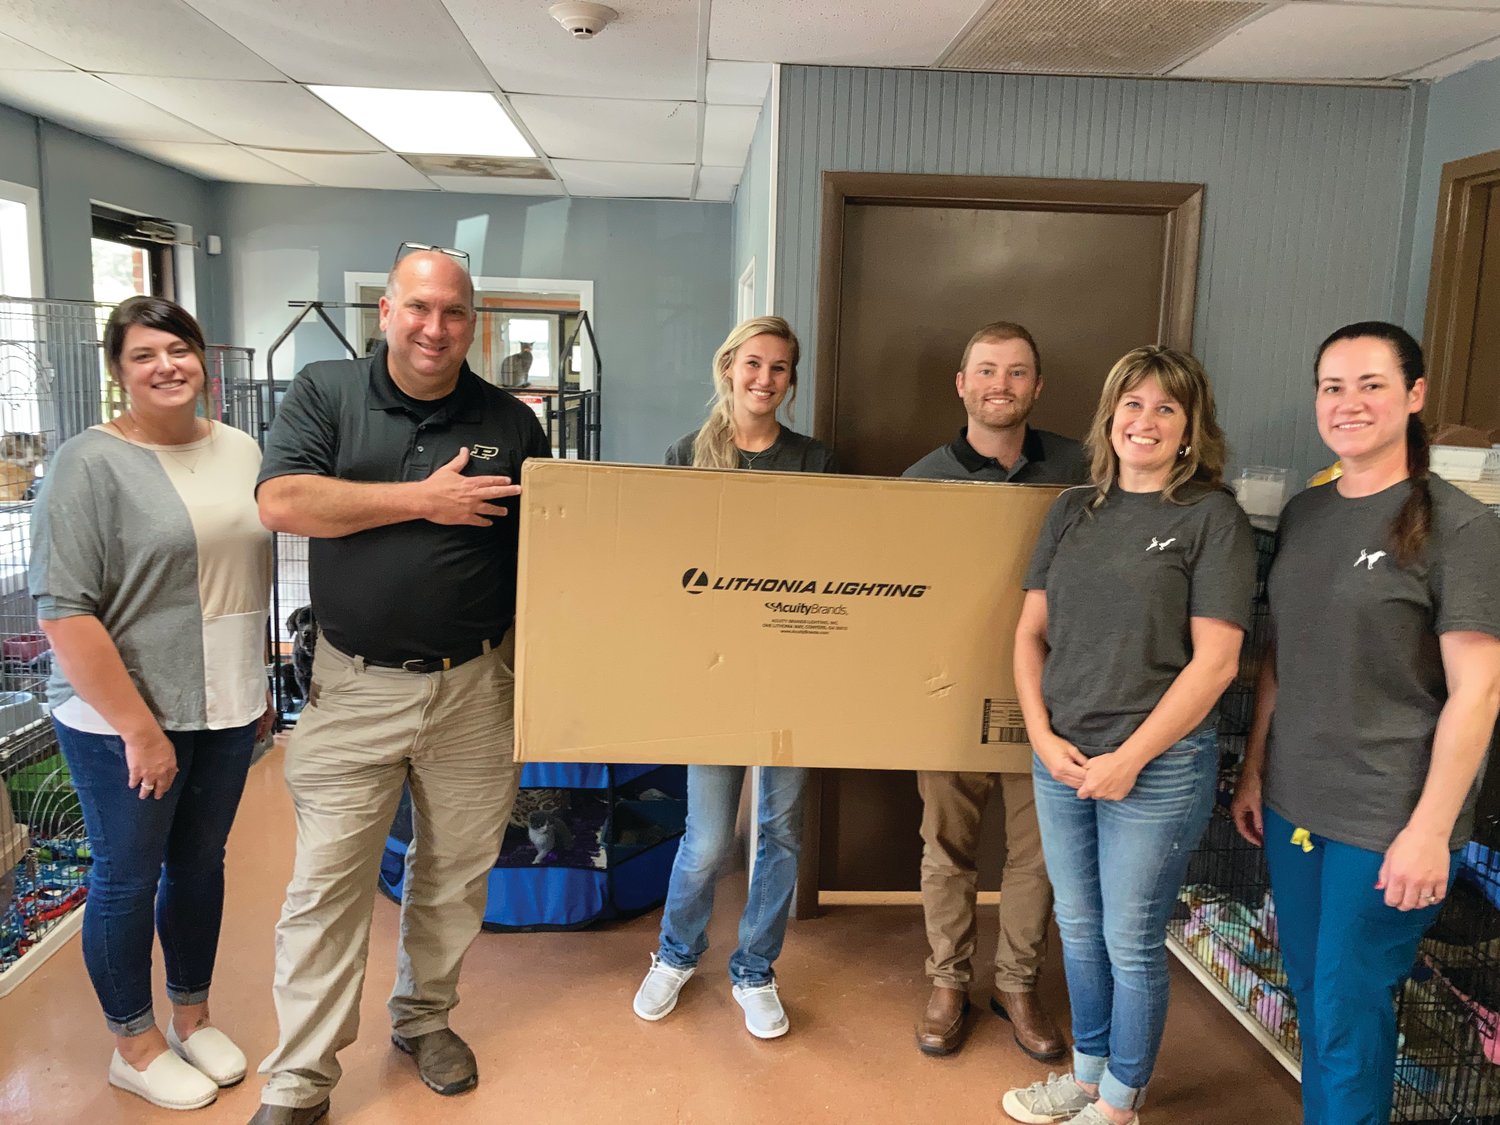 Acuity Brands Lighting donated lights to the Animal Welfare League for its lobby and office renovation. Pictured from left are Carrie Stiff, Acuity human resources manager; Brian Horsting, Acuity focus factory manager; Rachel Lumkes, AWL manager; Nick Sommer, Acuity controller; Misha Anderson, AWL director; and Nickee Sillery, AWL medical coordinator.